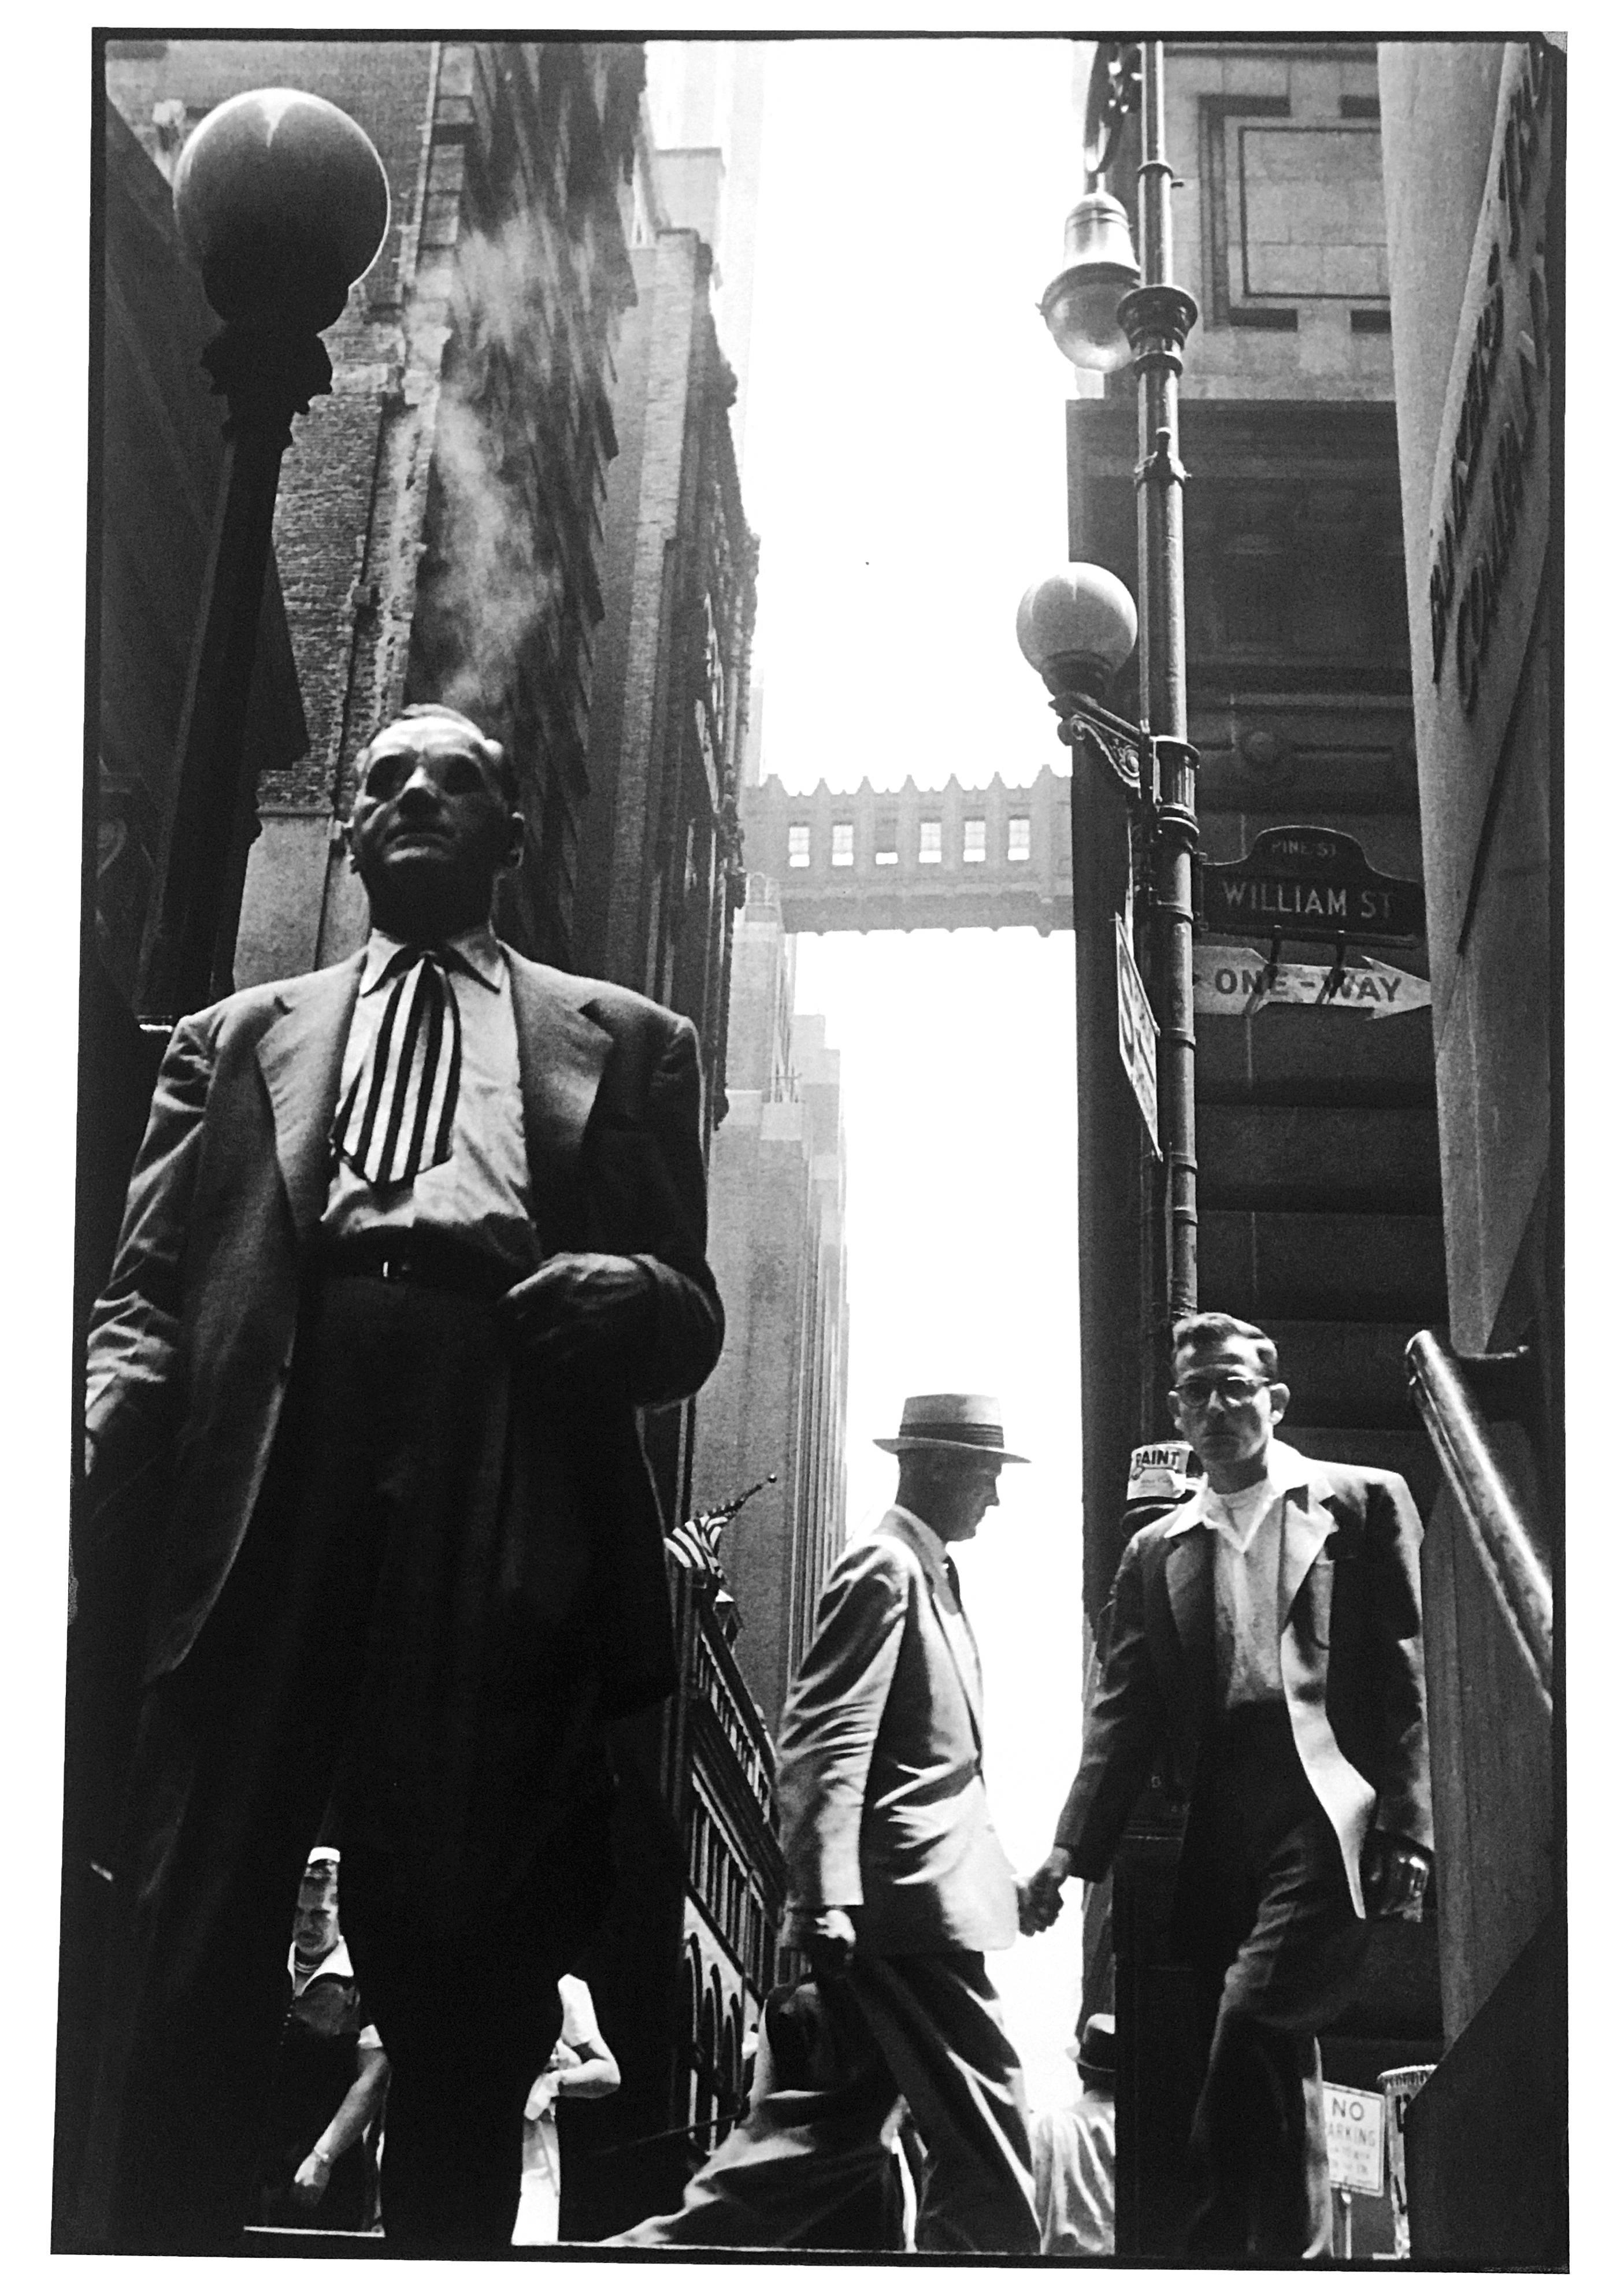 Leonard Freed Black and White Photograph - Wall Street, New York City, signed and editioned print